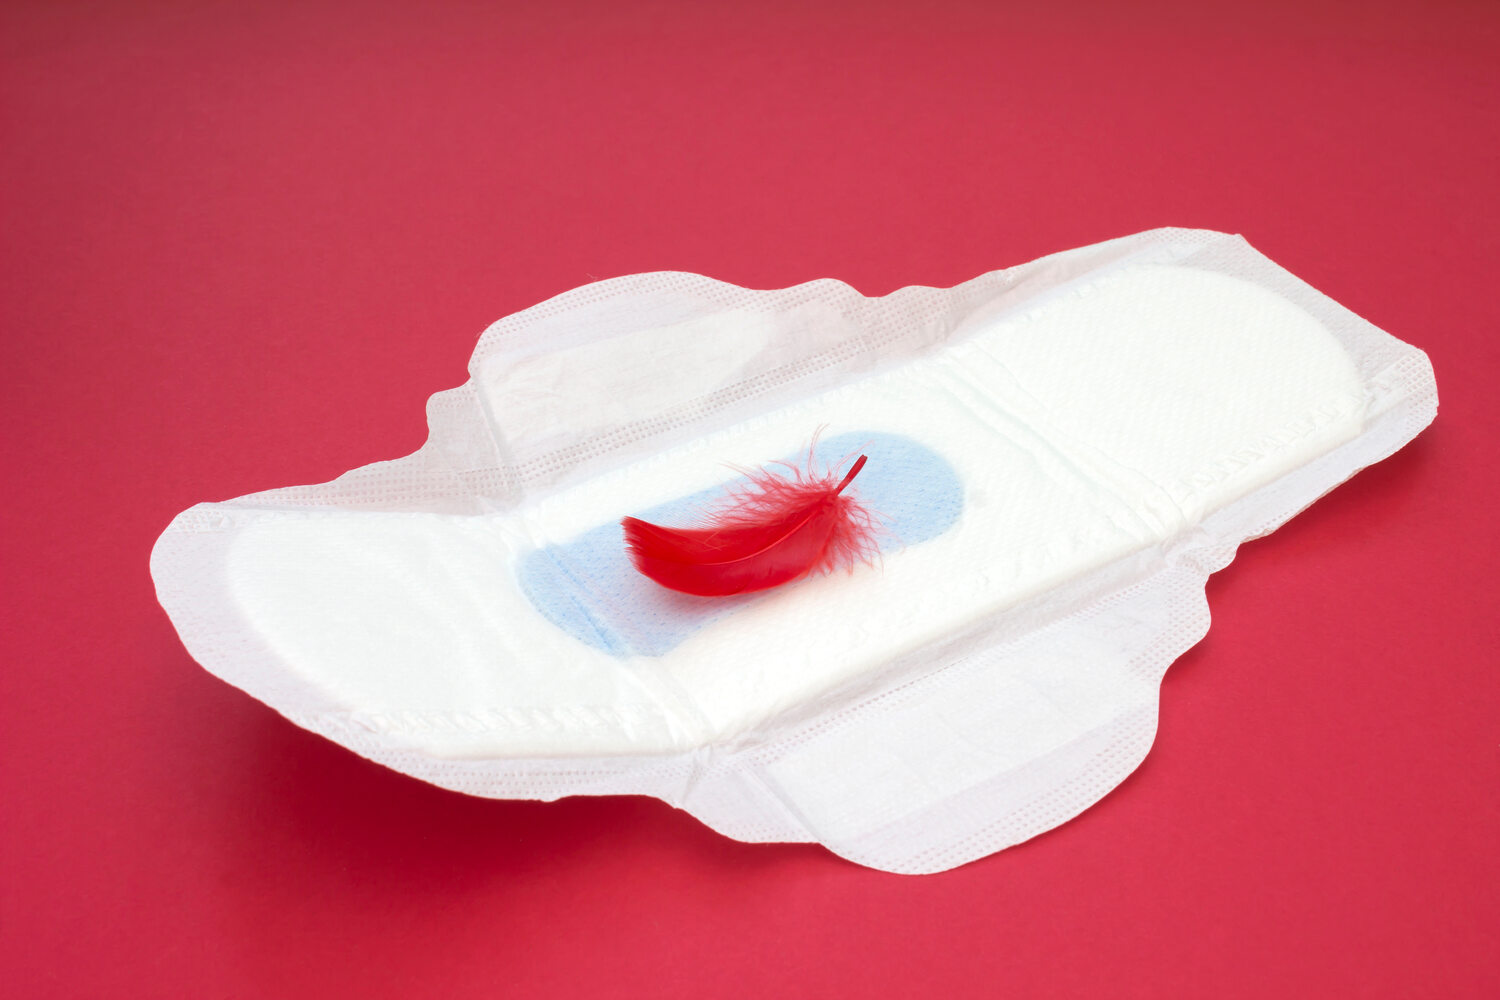 Ovulation Bleeding – Everything You Need to Know